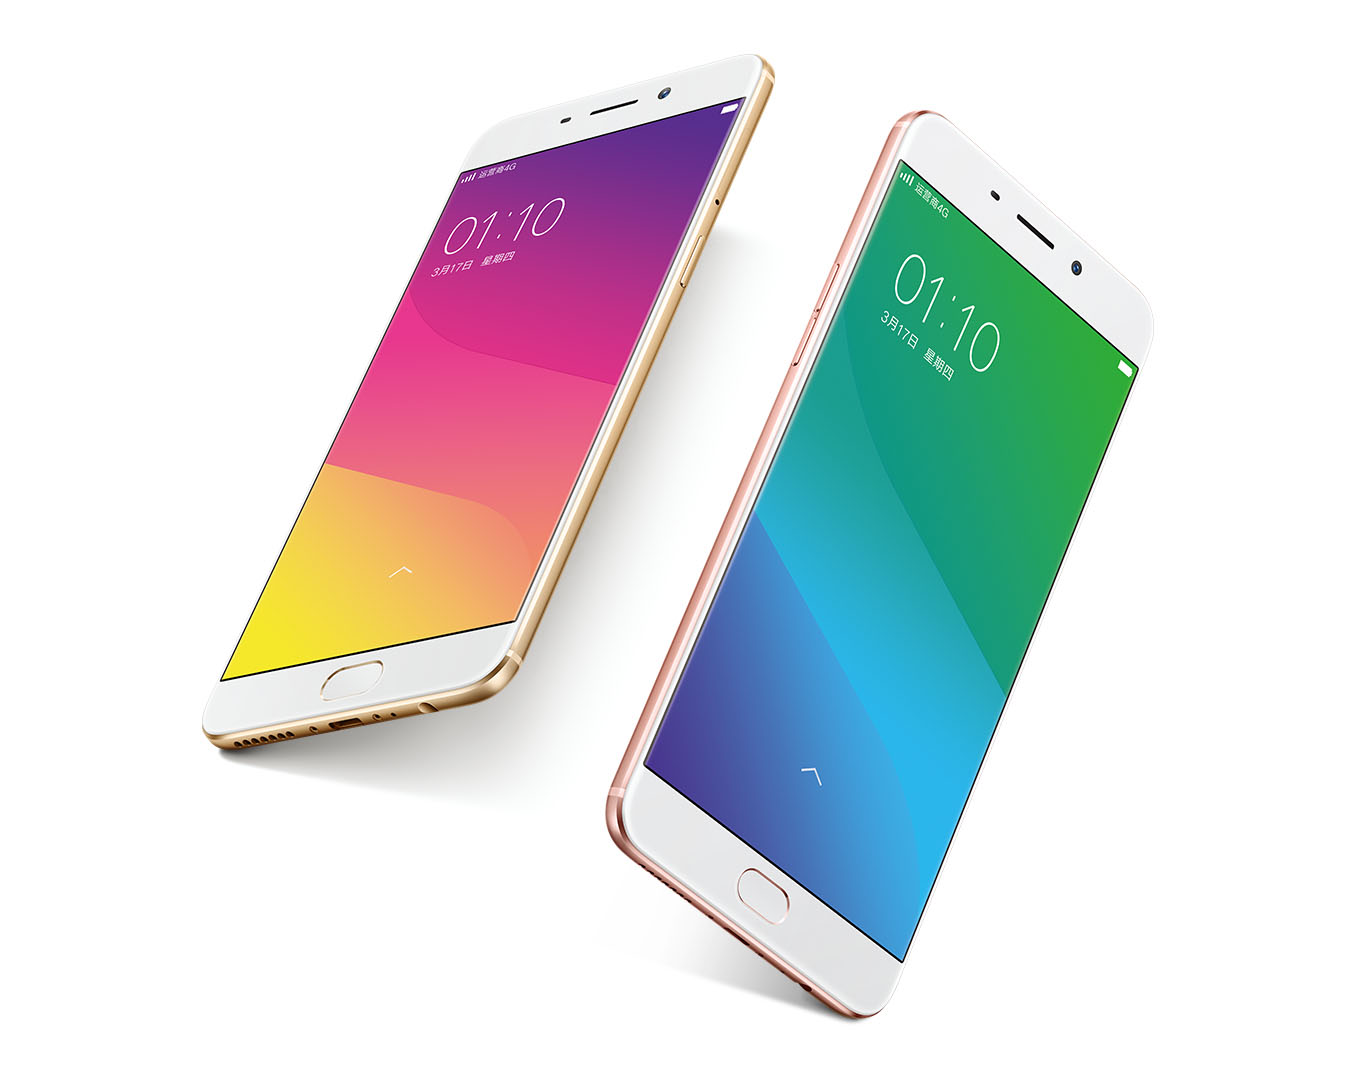 OPPO R9 and R9 Plus are now official